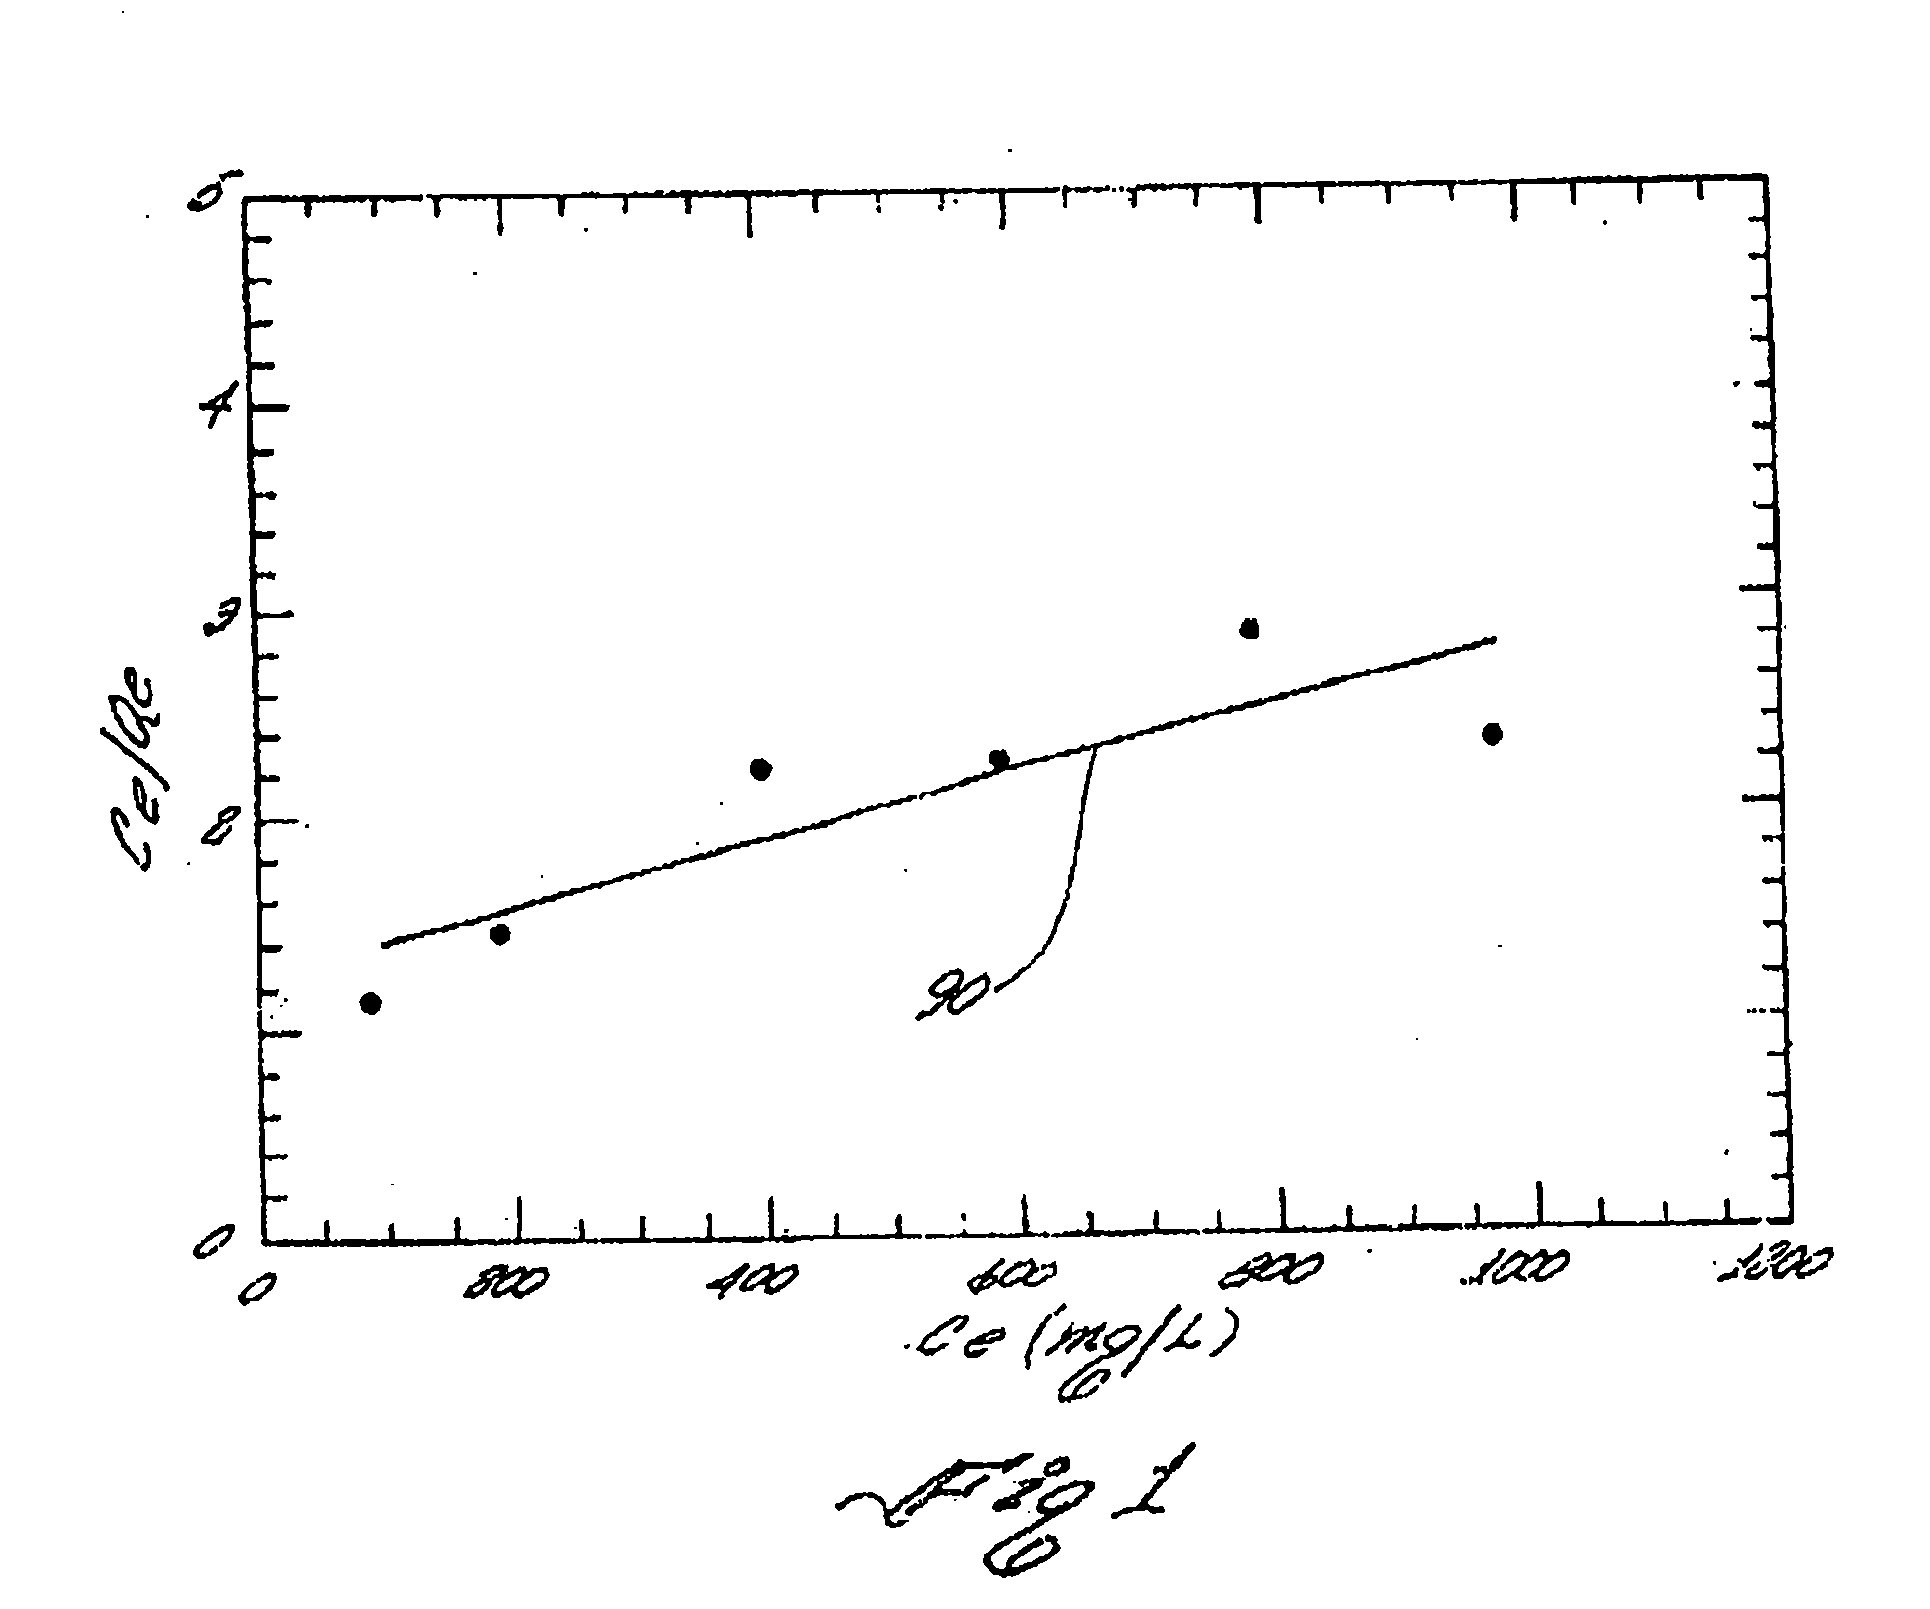 Mercury adsorbent composition, process of making same and method of separating mercury from fluids